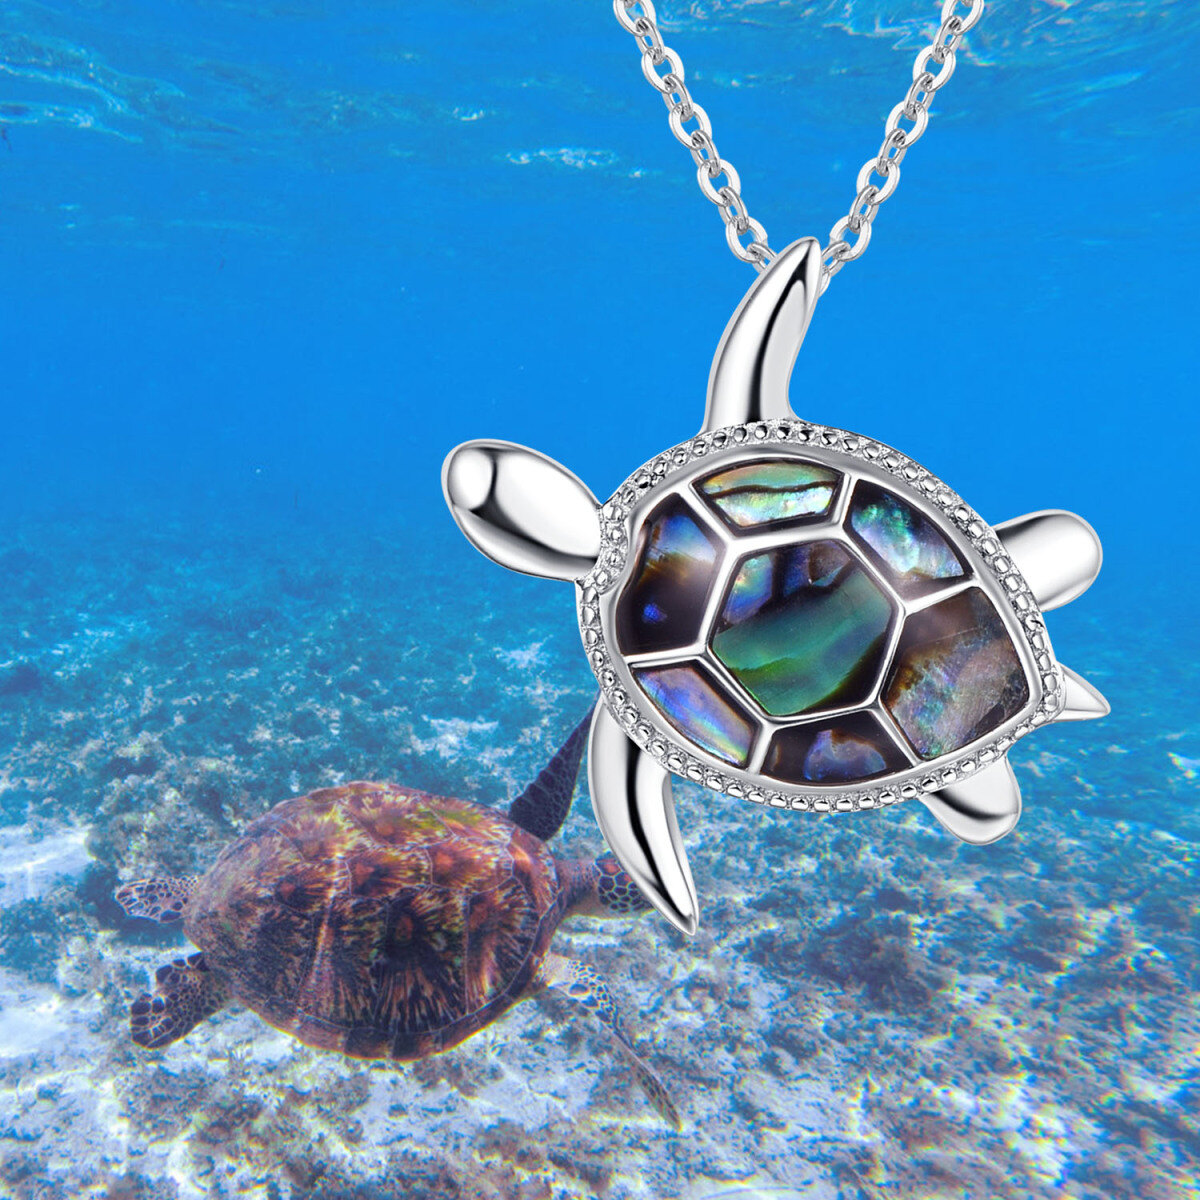 Women's Sterling Silver Turtle Abalone Shell Pendant Necklace as Birthday Christmas Gift-4